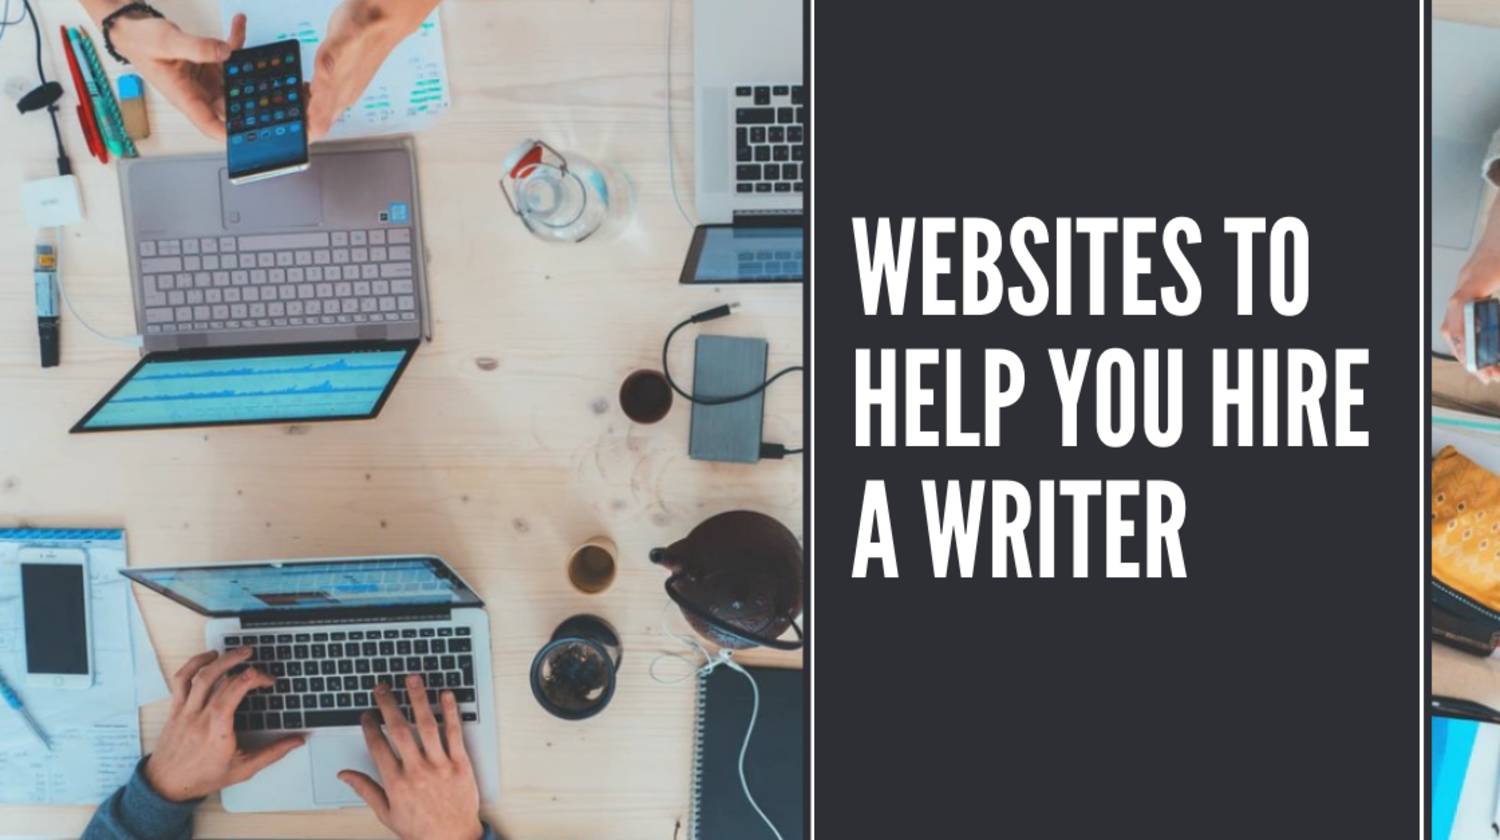 23 websites and tips to help you hire the right writer